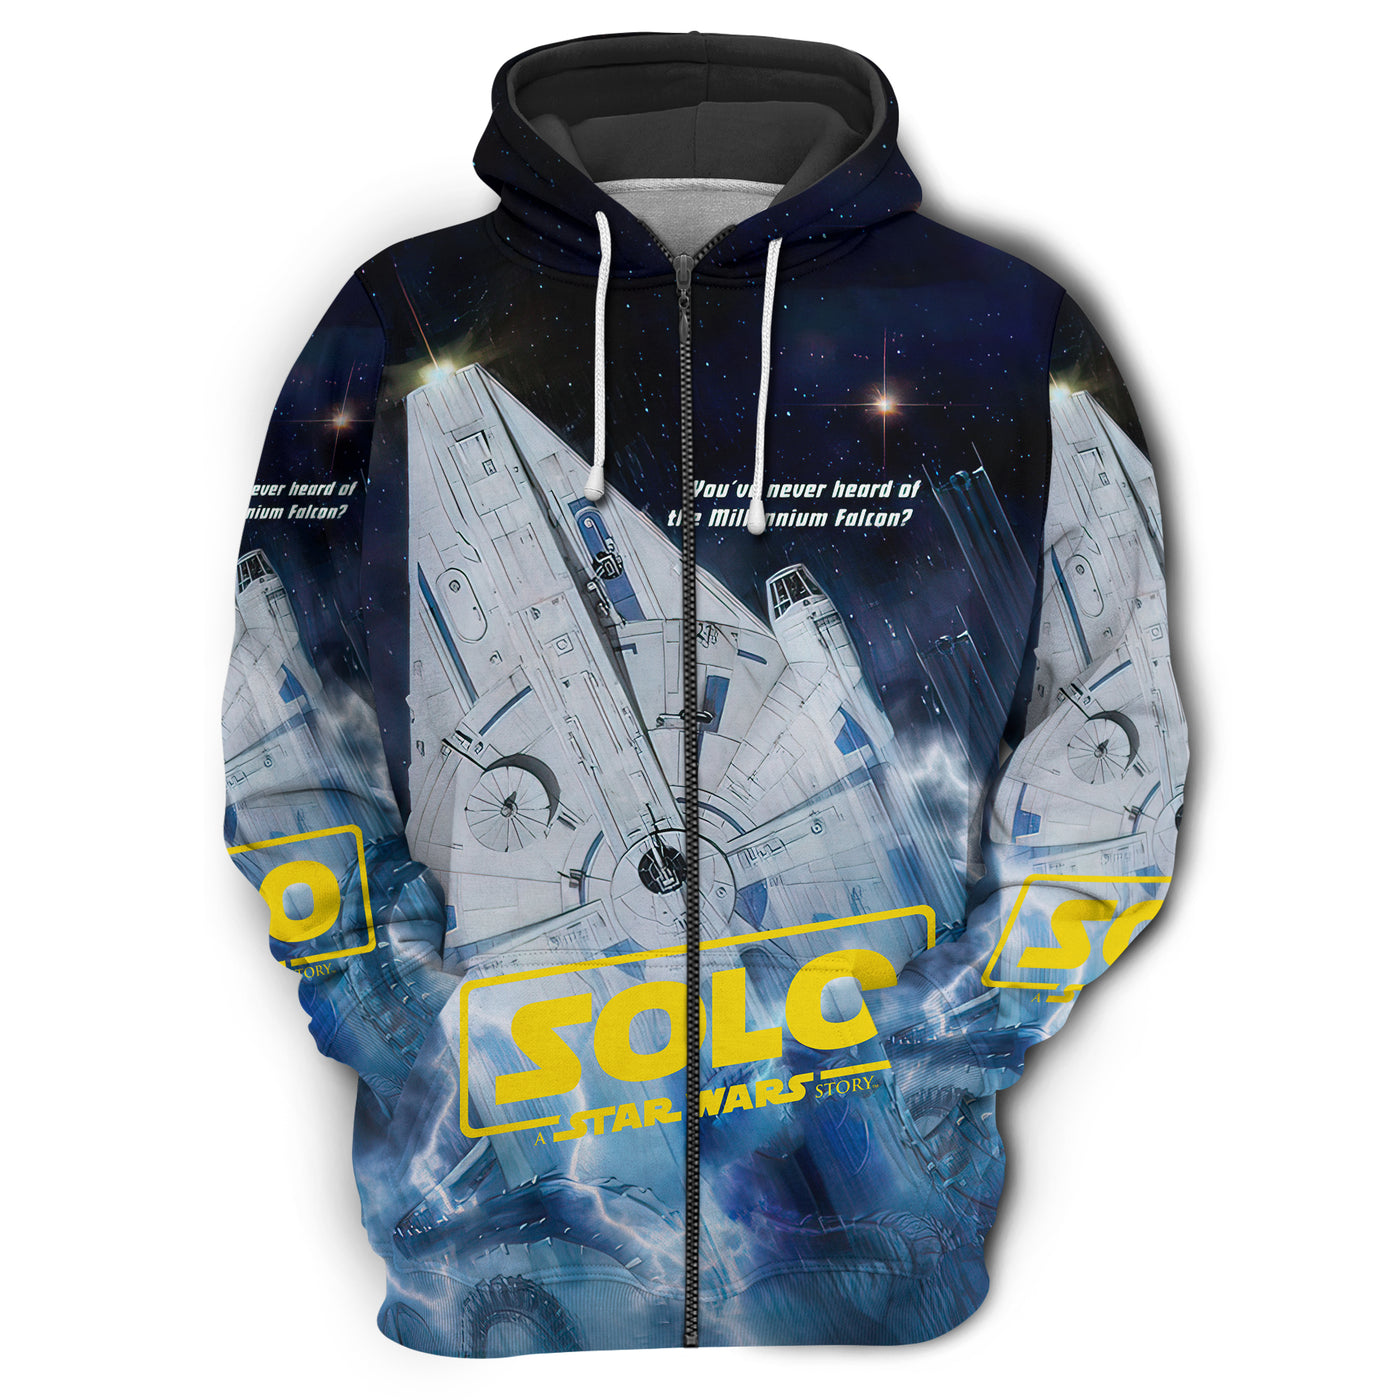 Solo SW You’ve Never Heard Of The Millennium Falcon - Hoodie